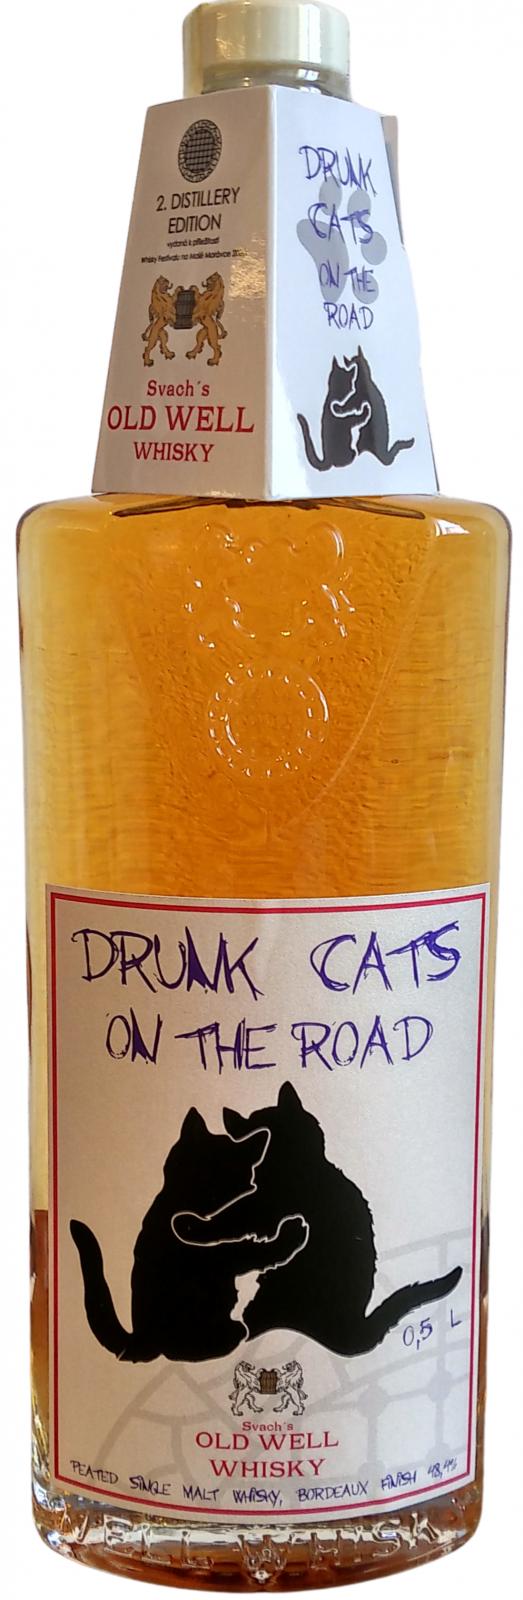 Old Well Drunk Cats on the road